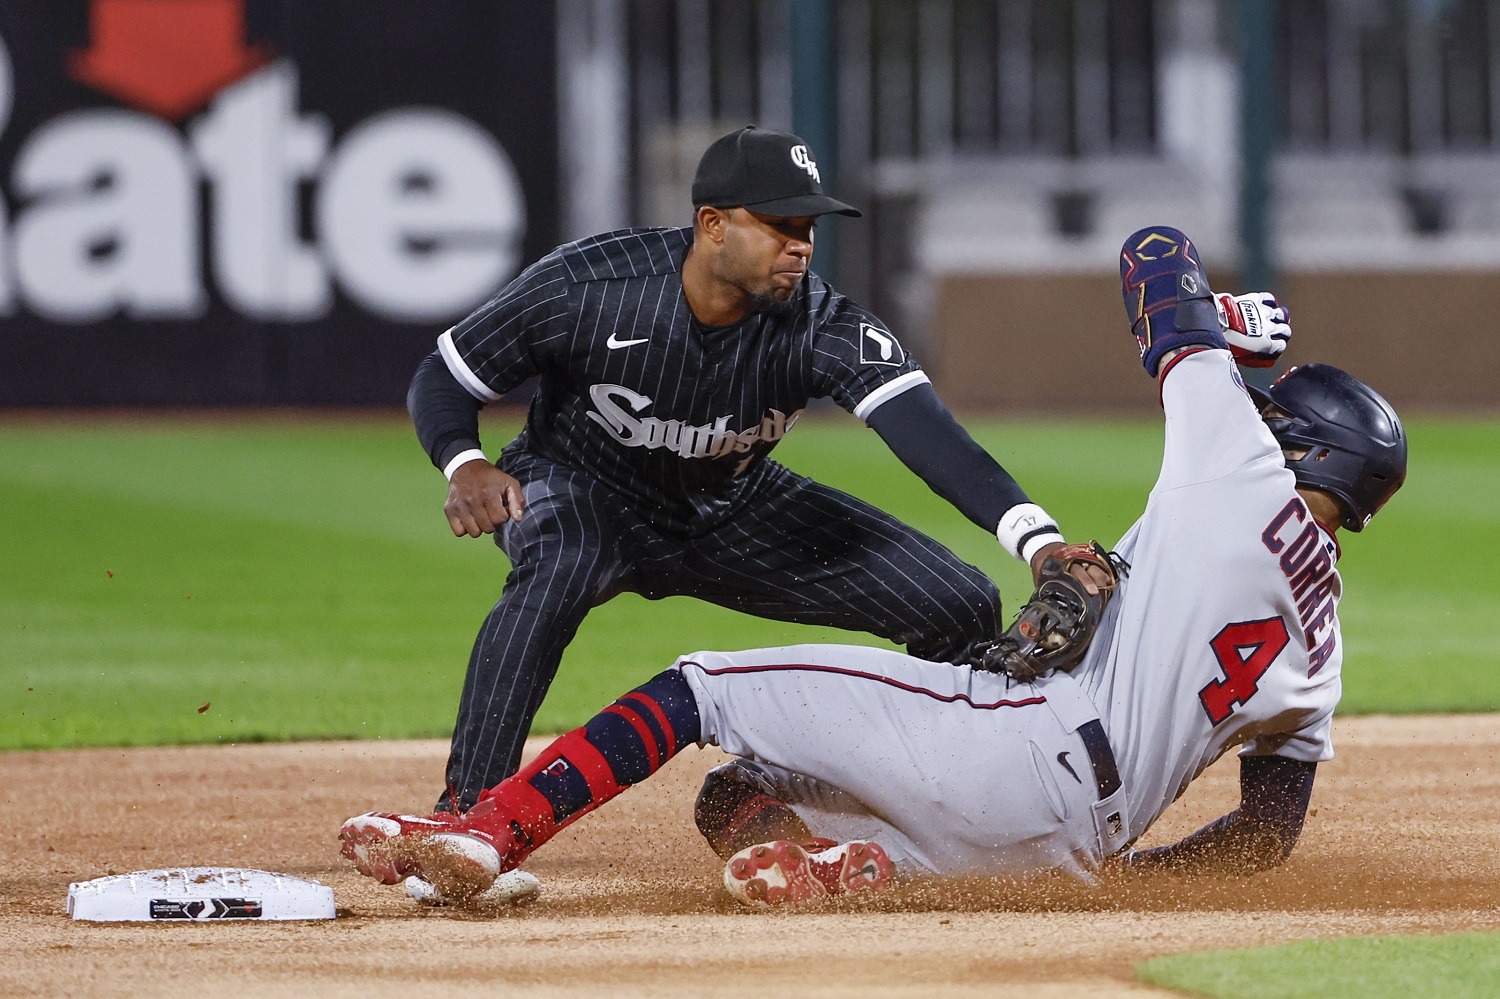 MLB's bigger bases could lead to more steals, fewer injuries, experts say